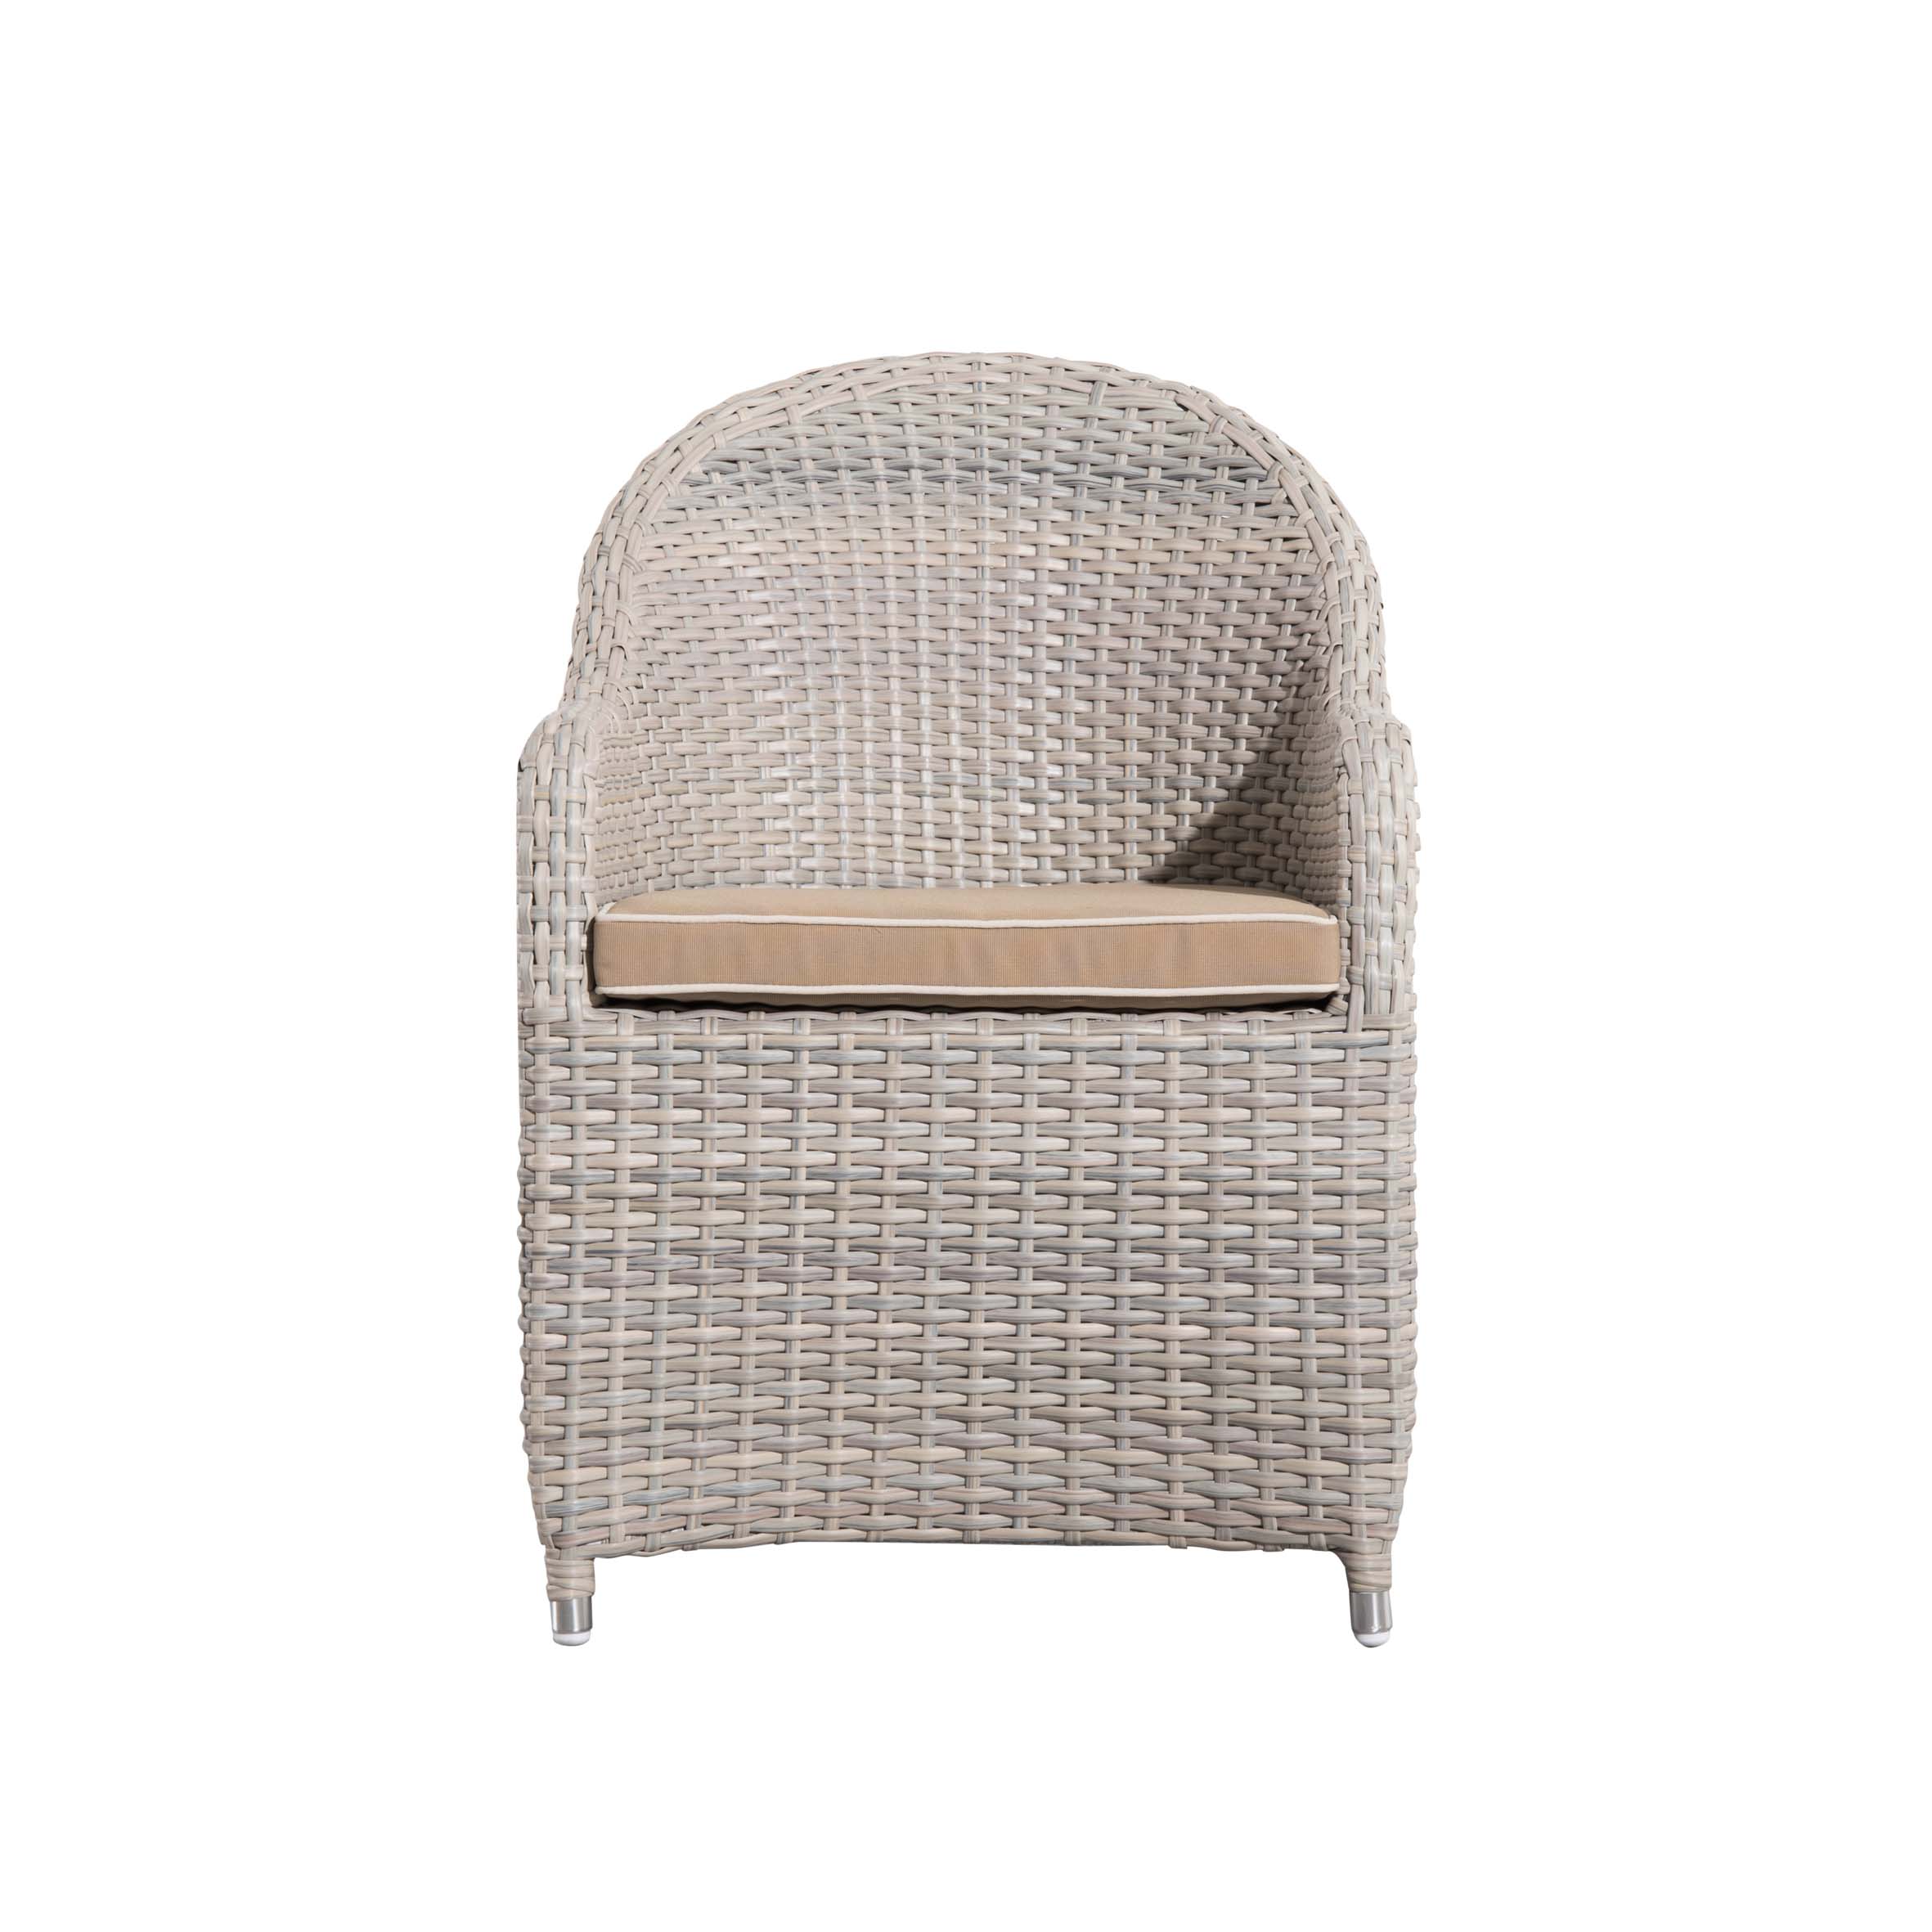 Ideal rattan dining chair S2